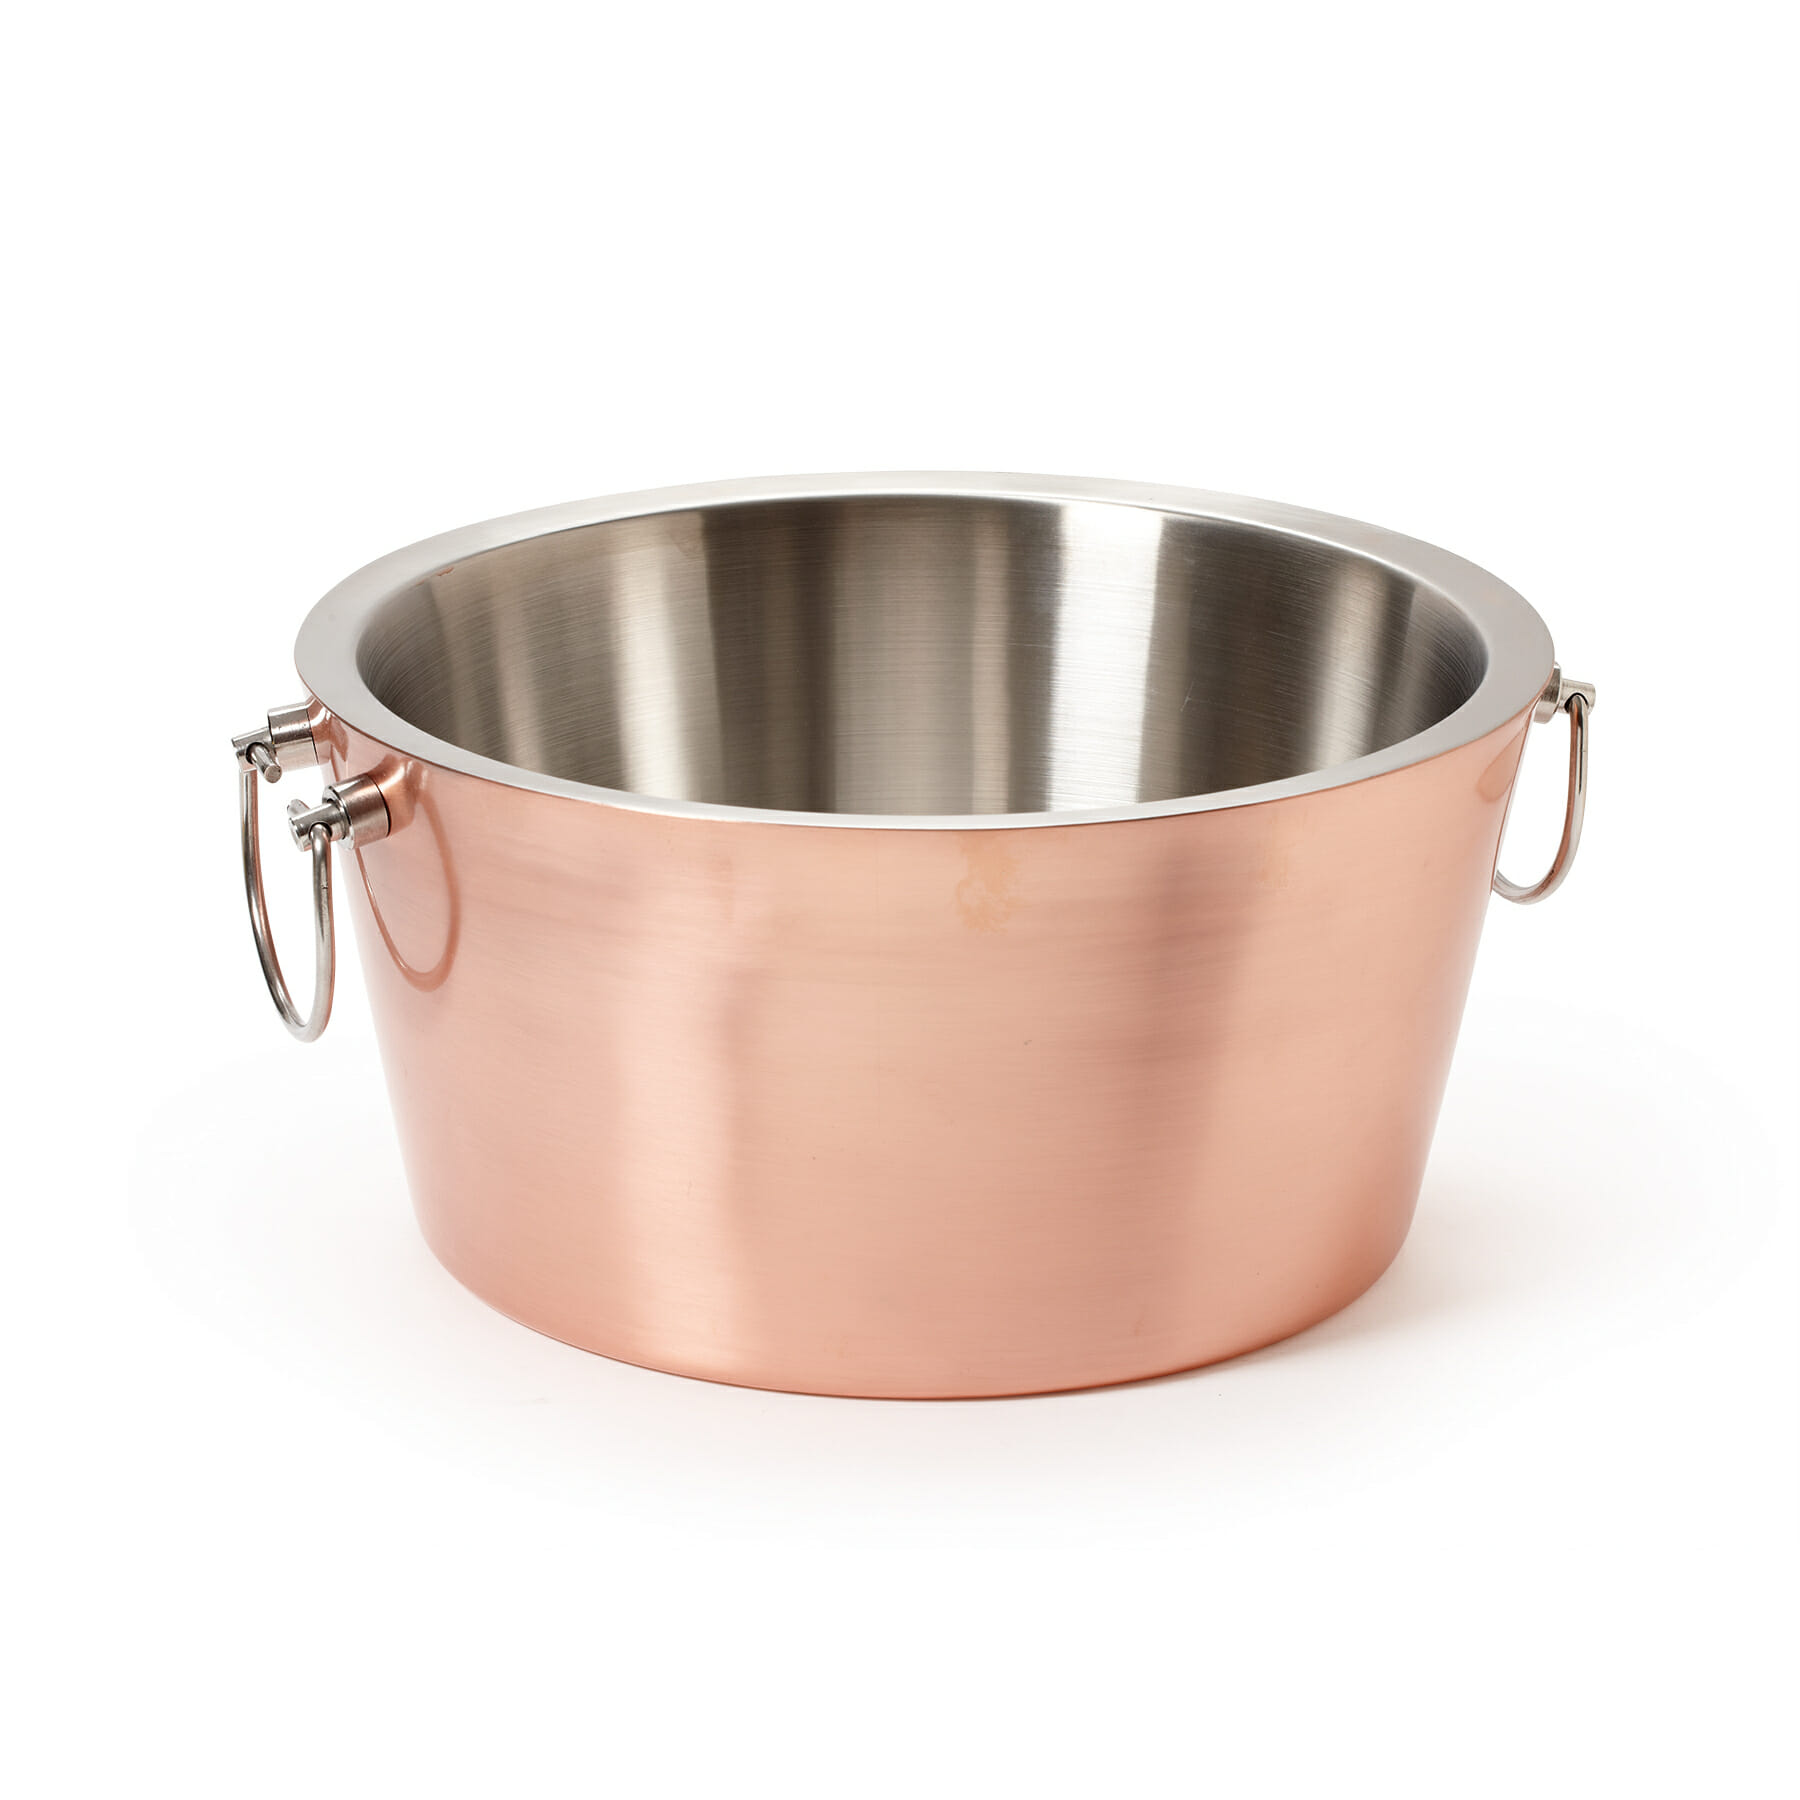 3.5 gal., 15" Dia. Double Wall Copper Beverage Tub with Brushed Finish (21" with Handles), 7.5" tall